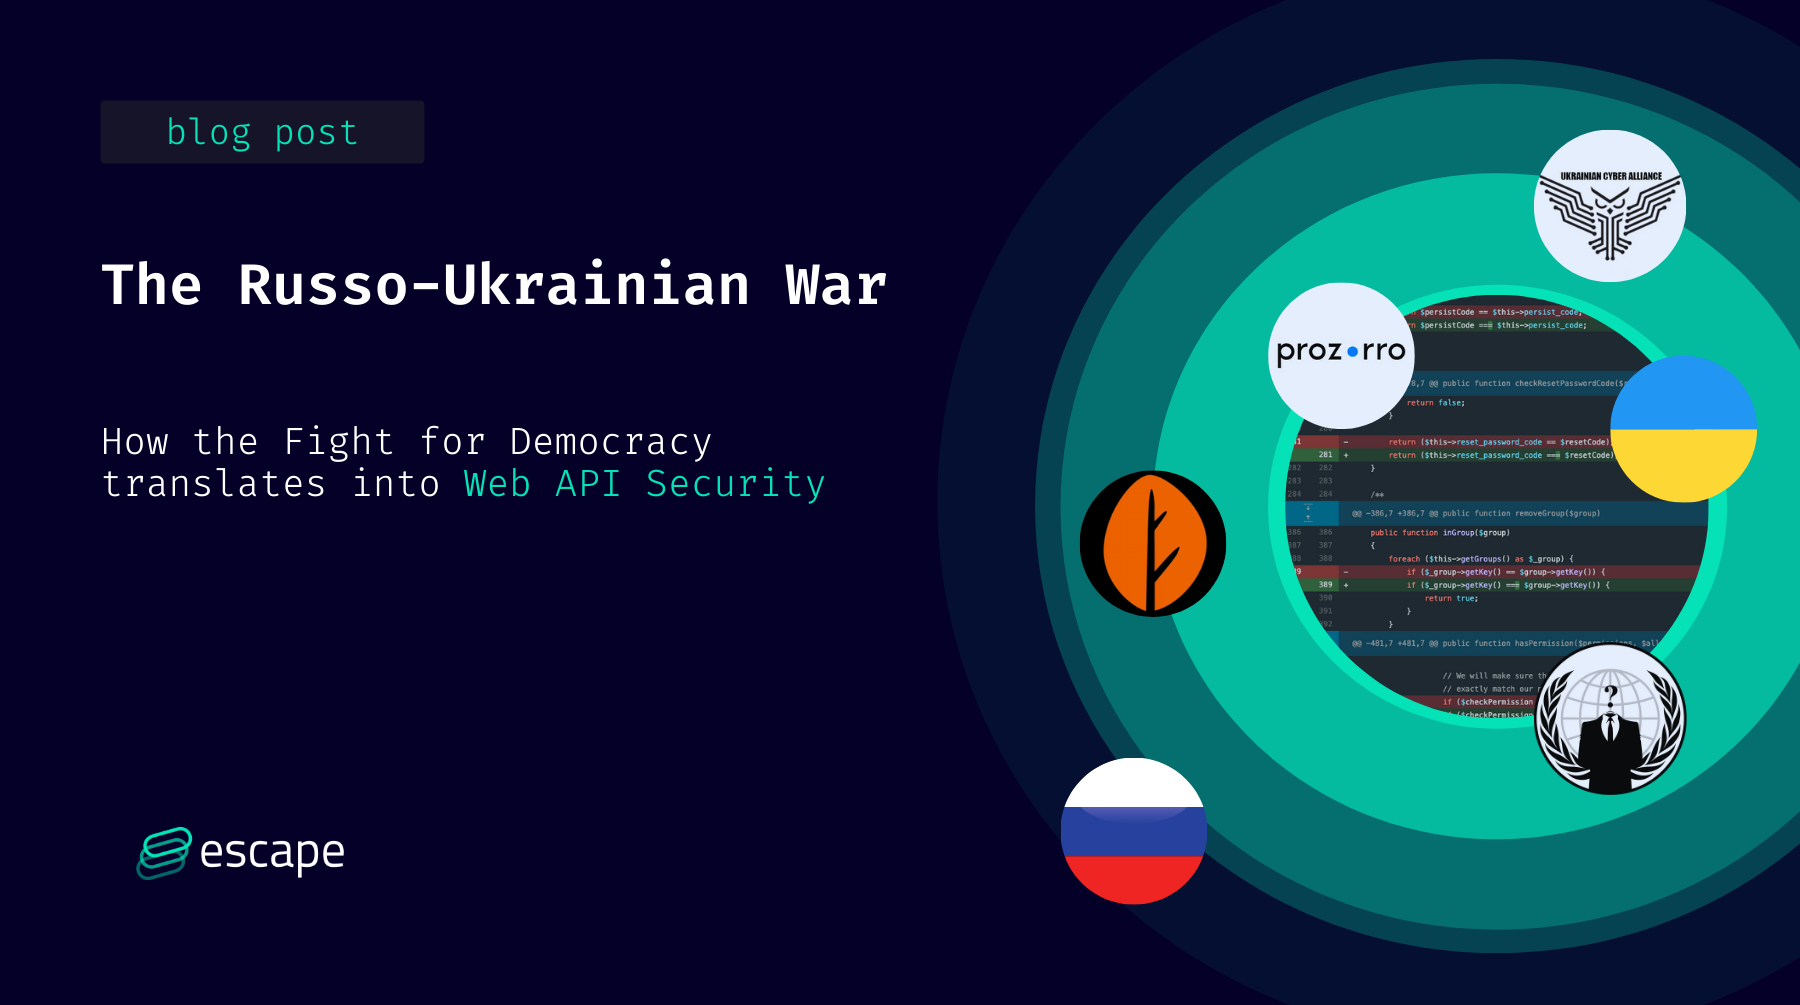 The Russo-Ukrainian War: How the Fight for Democracy translates into Web API Security